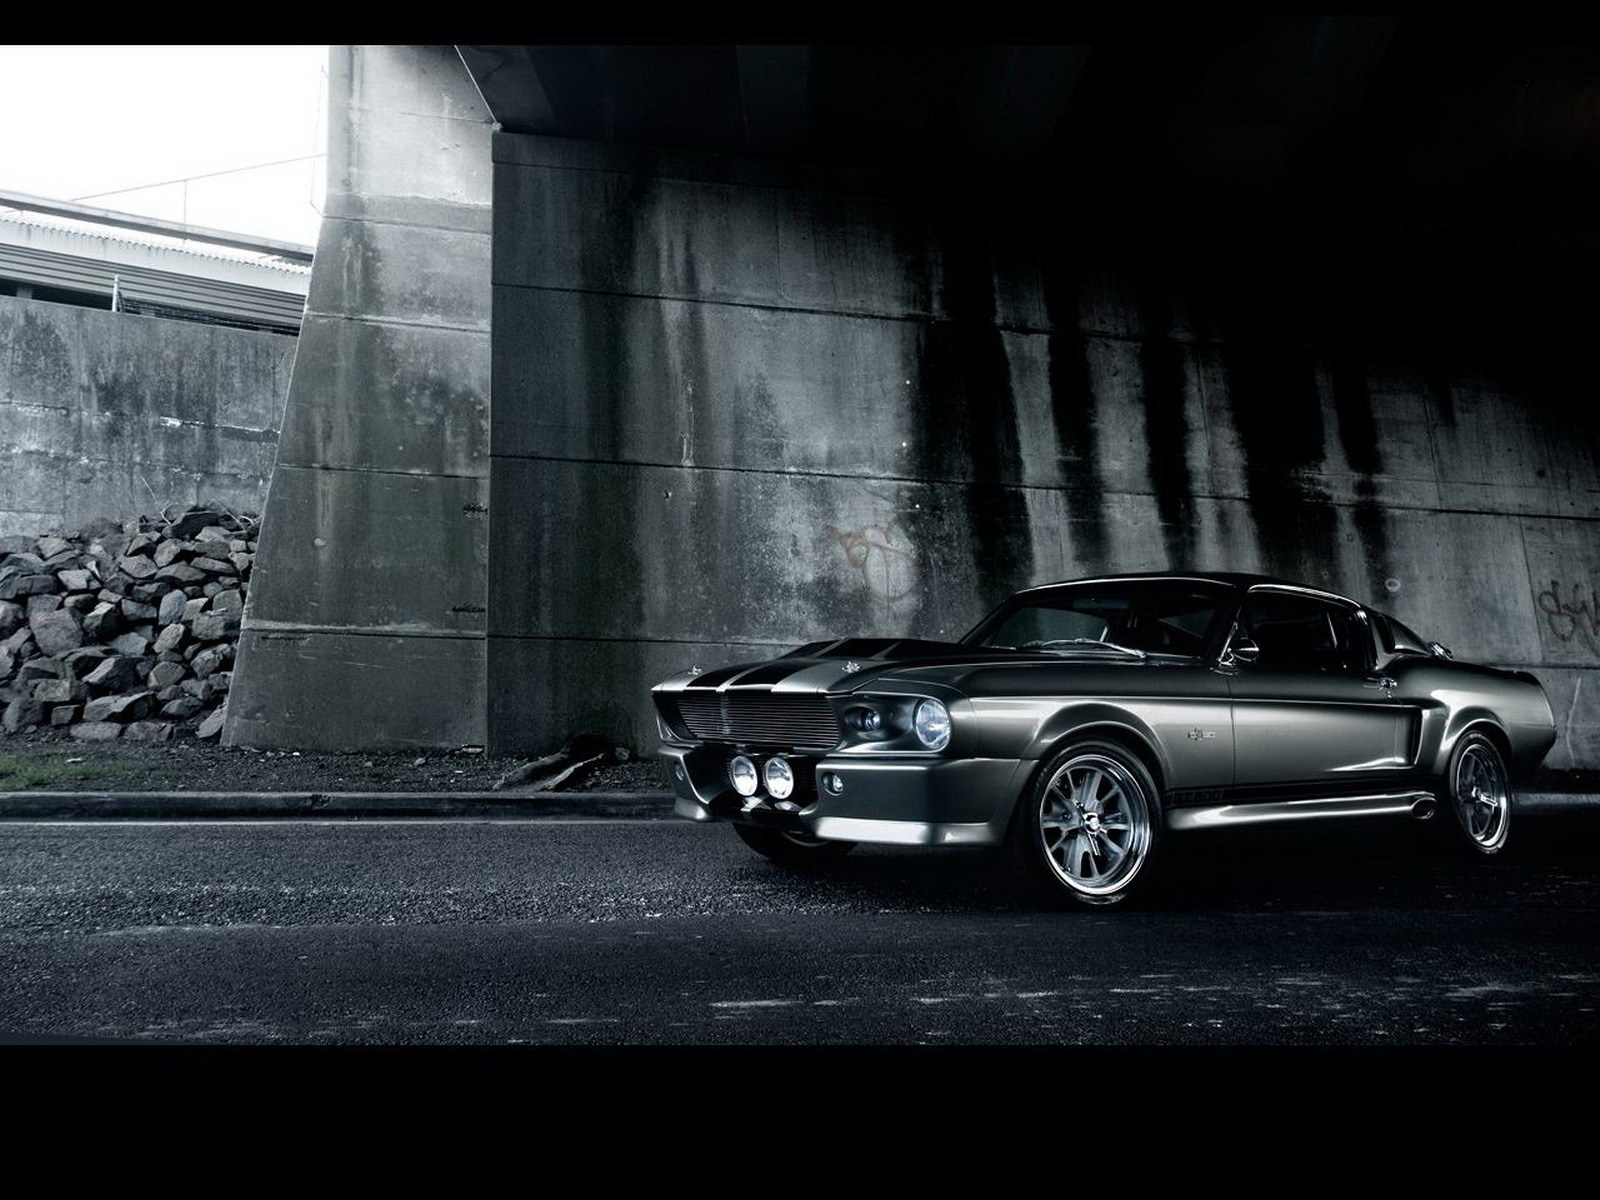 mustang, transport, art photo, auto, ford, black